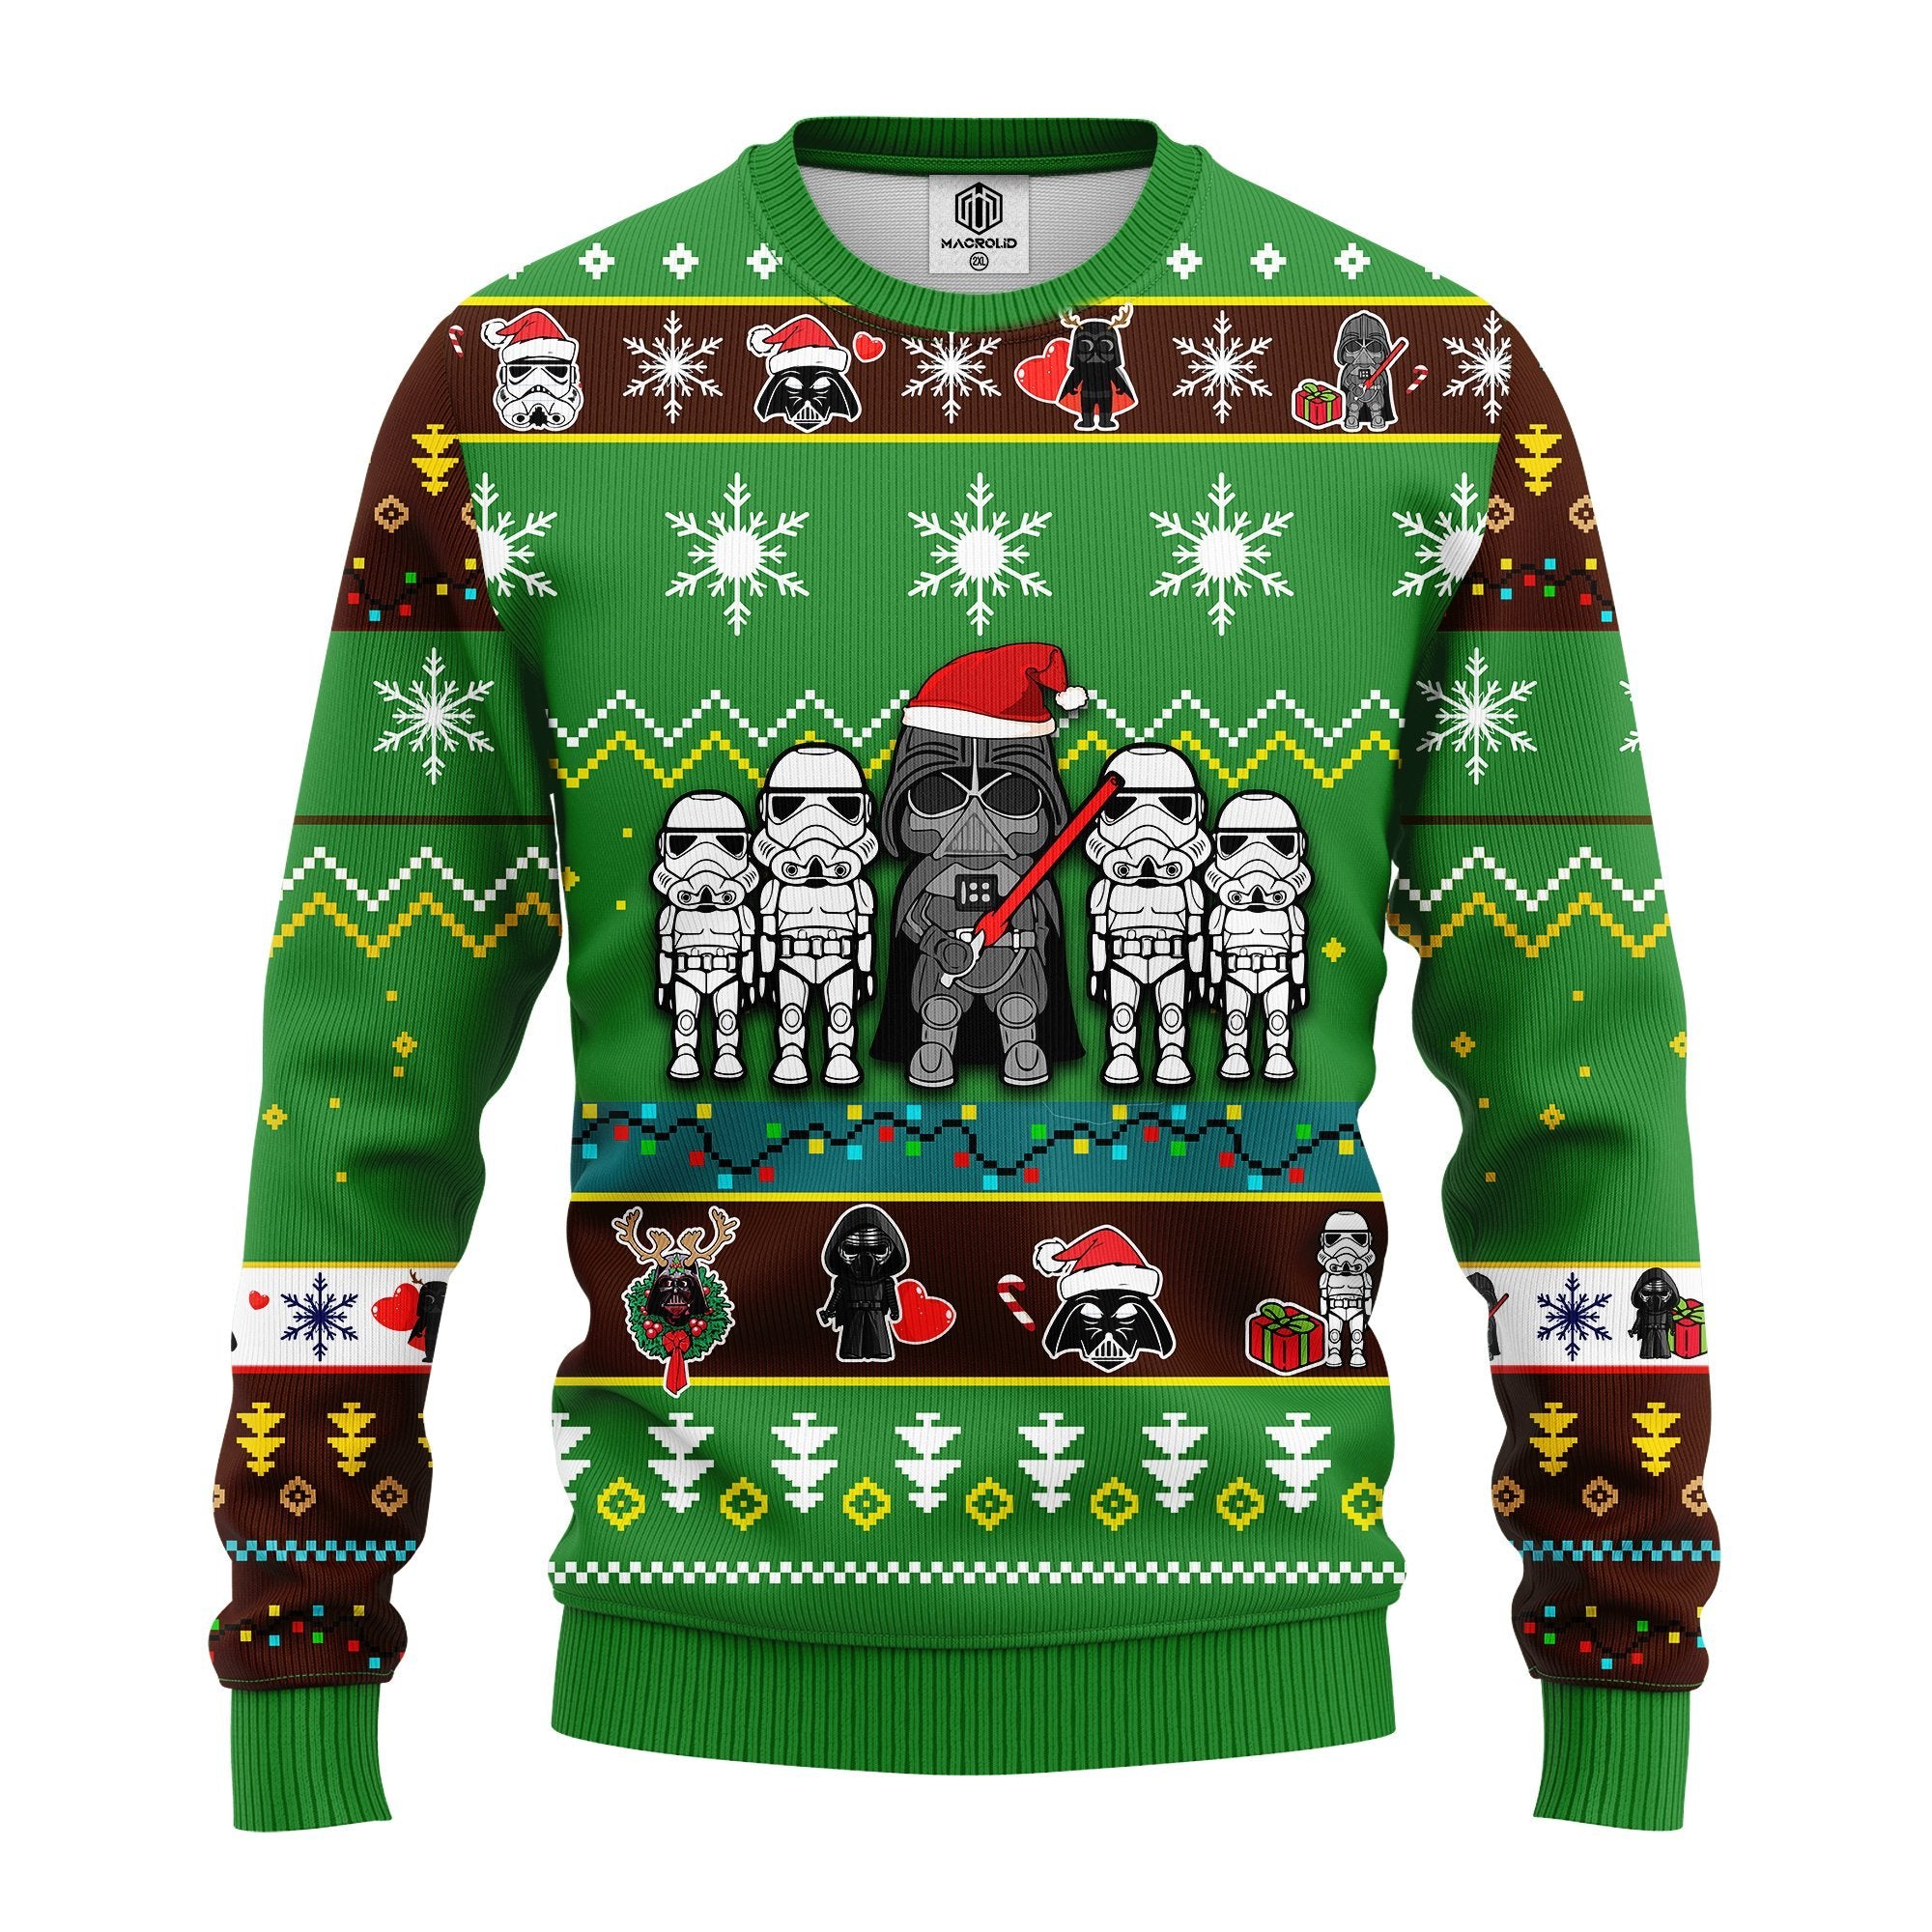 Star Wars Darth Vader Ugly Christmas Sweater Green 1 Amazing Gift Idea Thanksgiving Gift